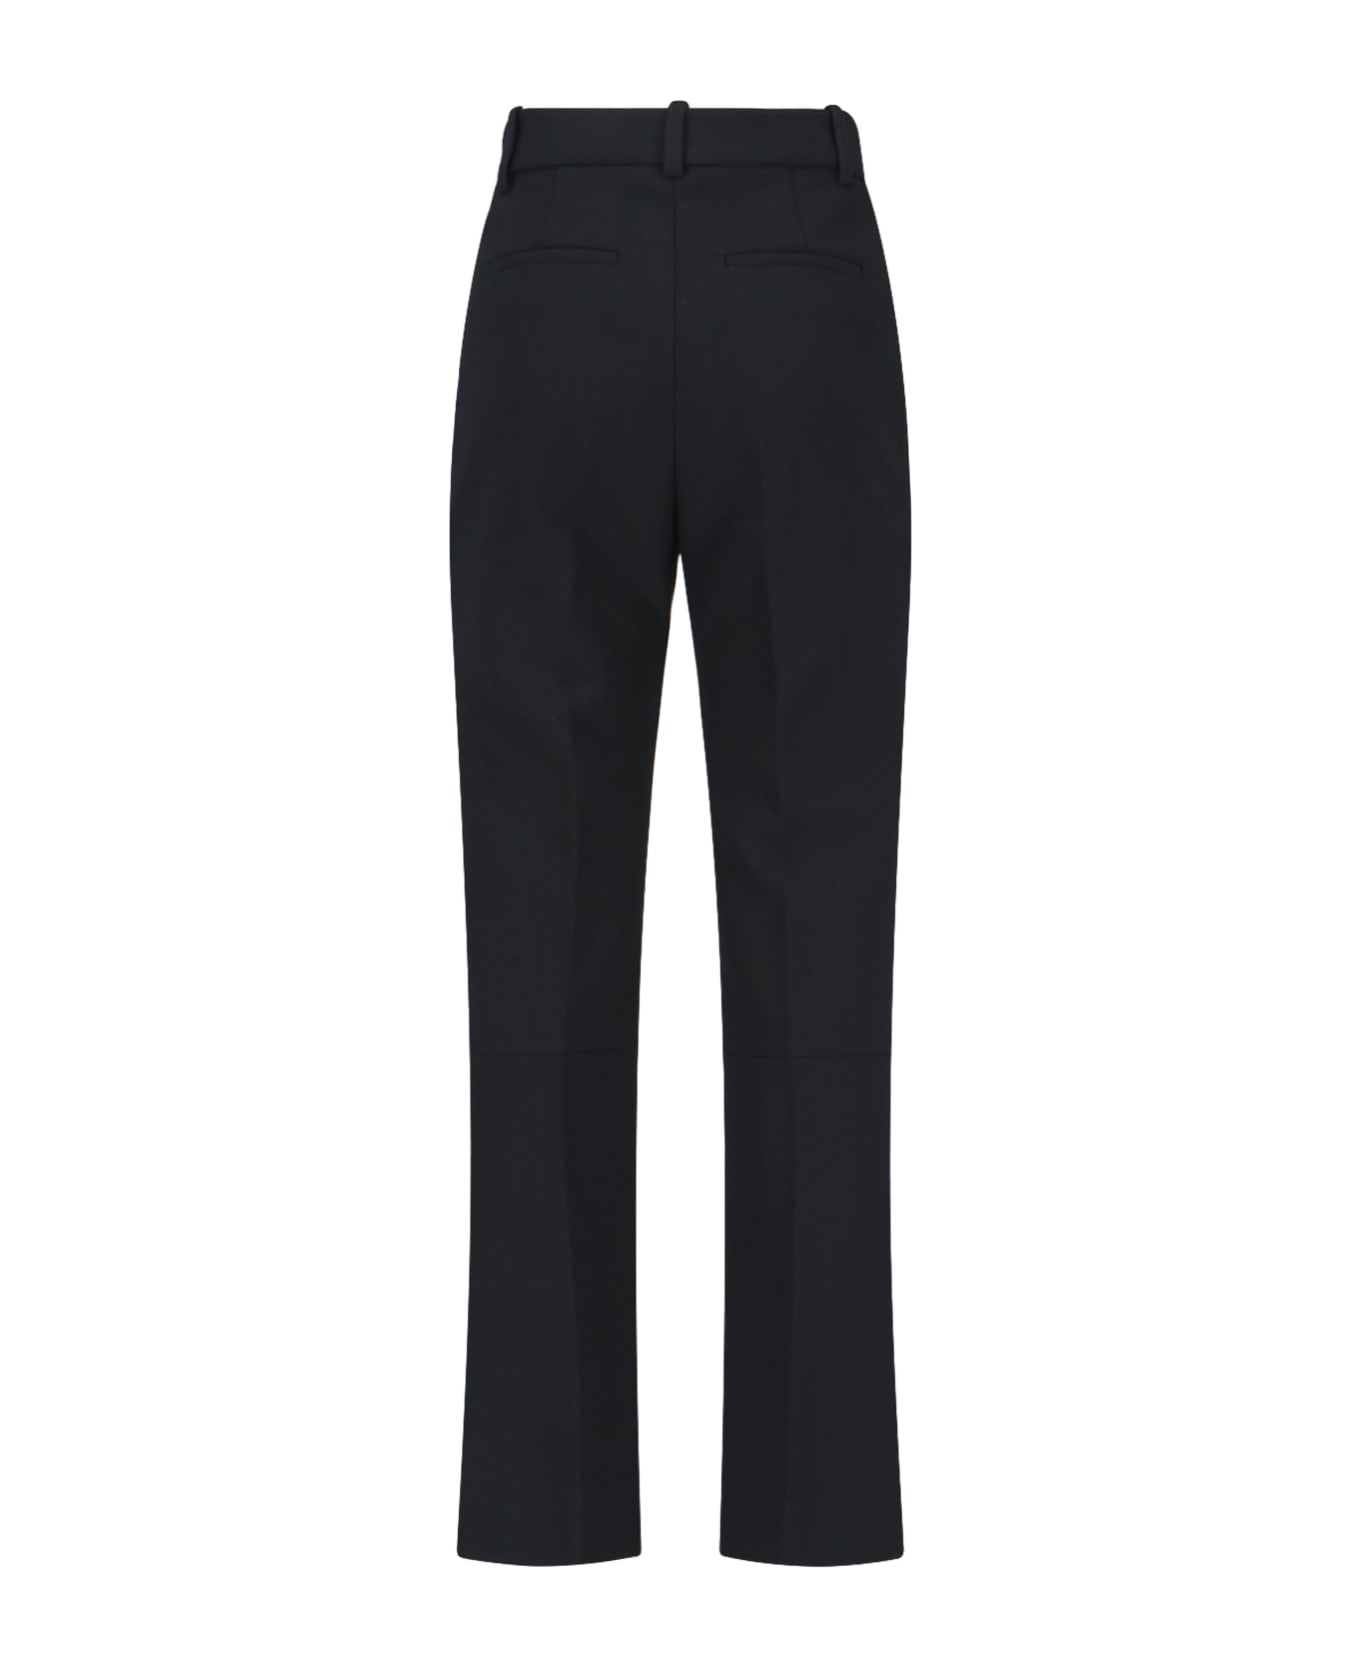 Victoria Beckham Tailored Trousers - Black  